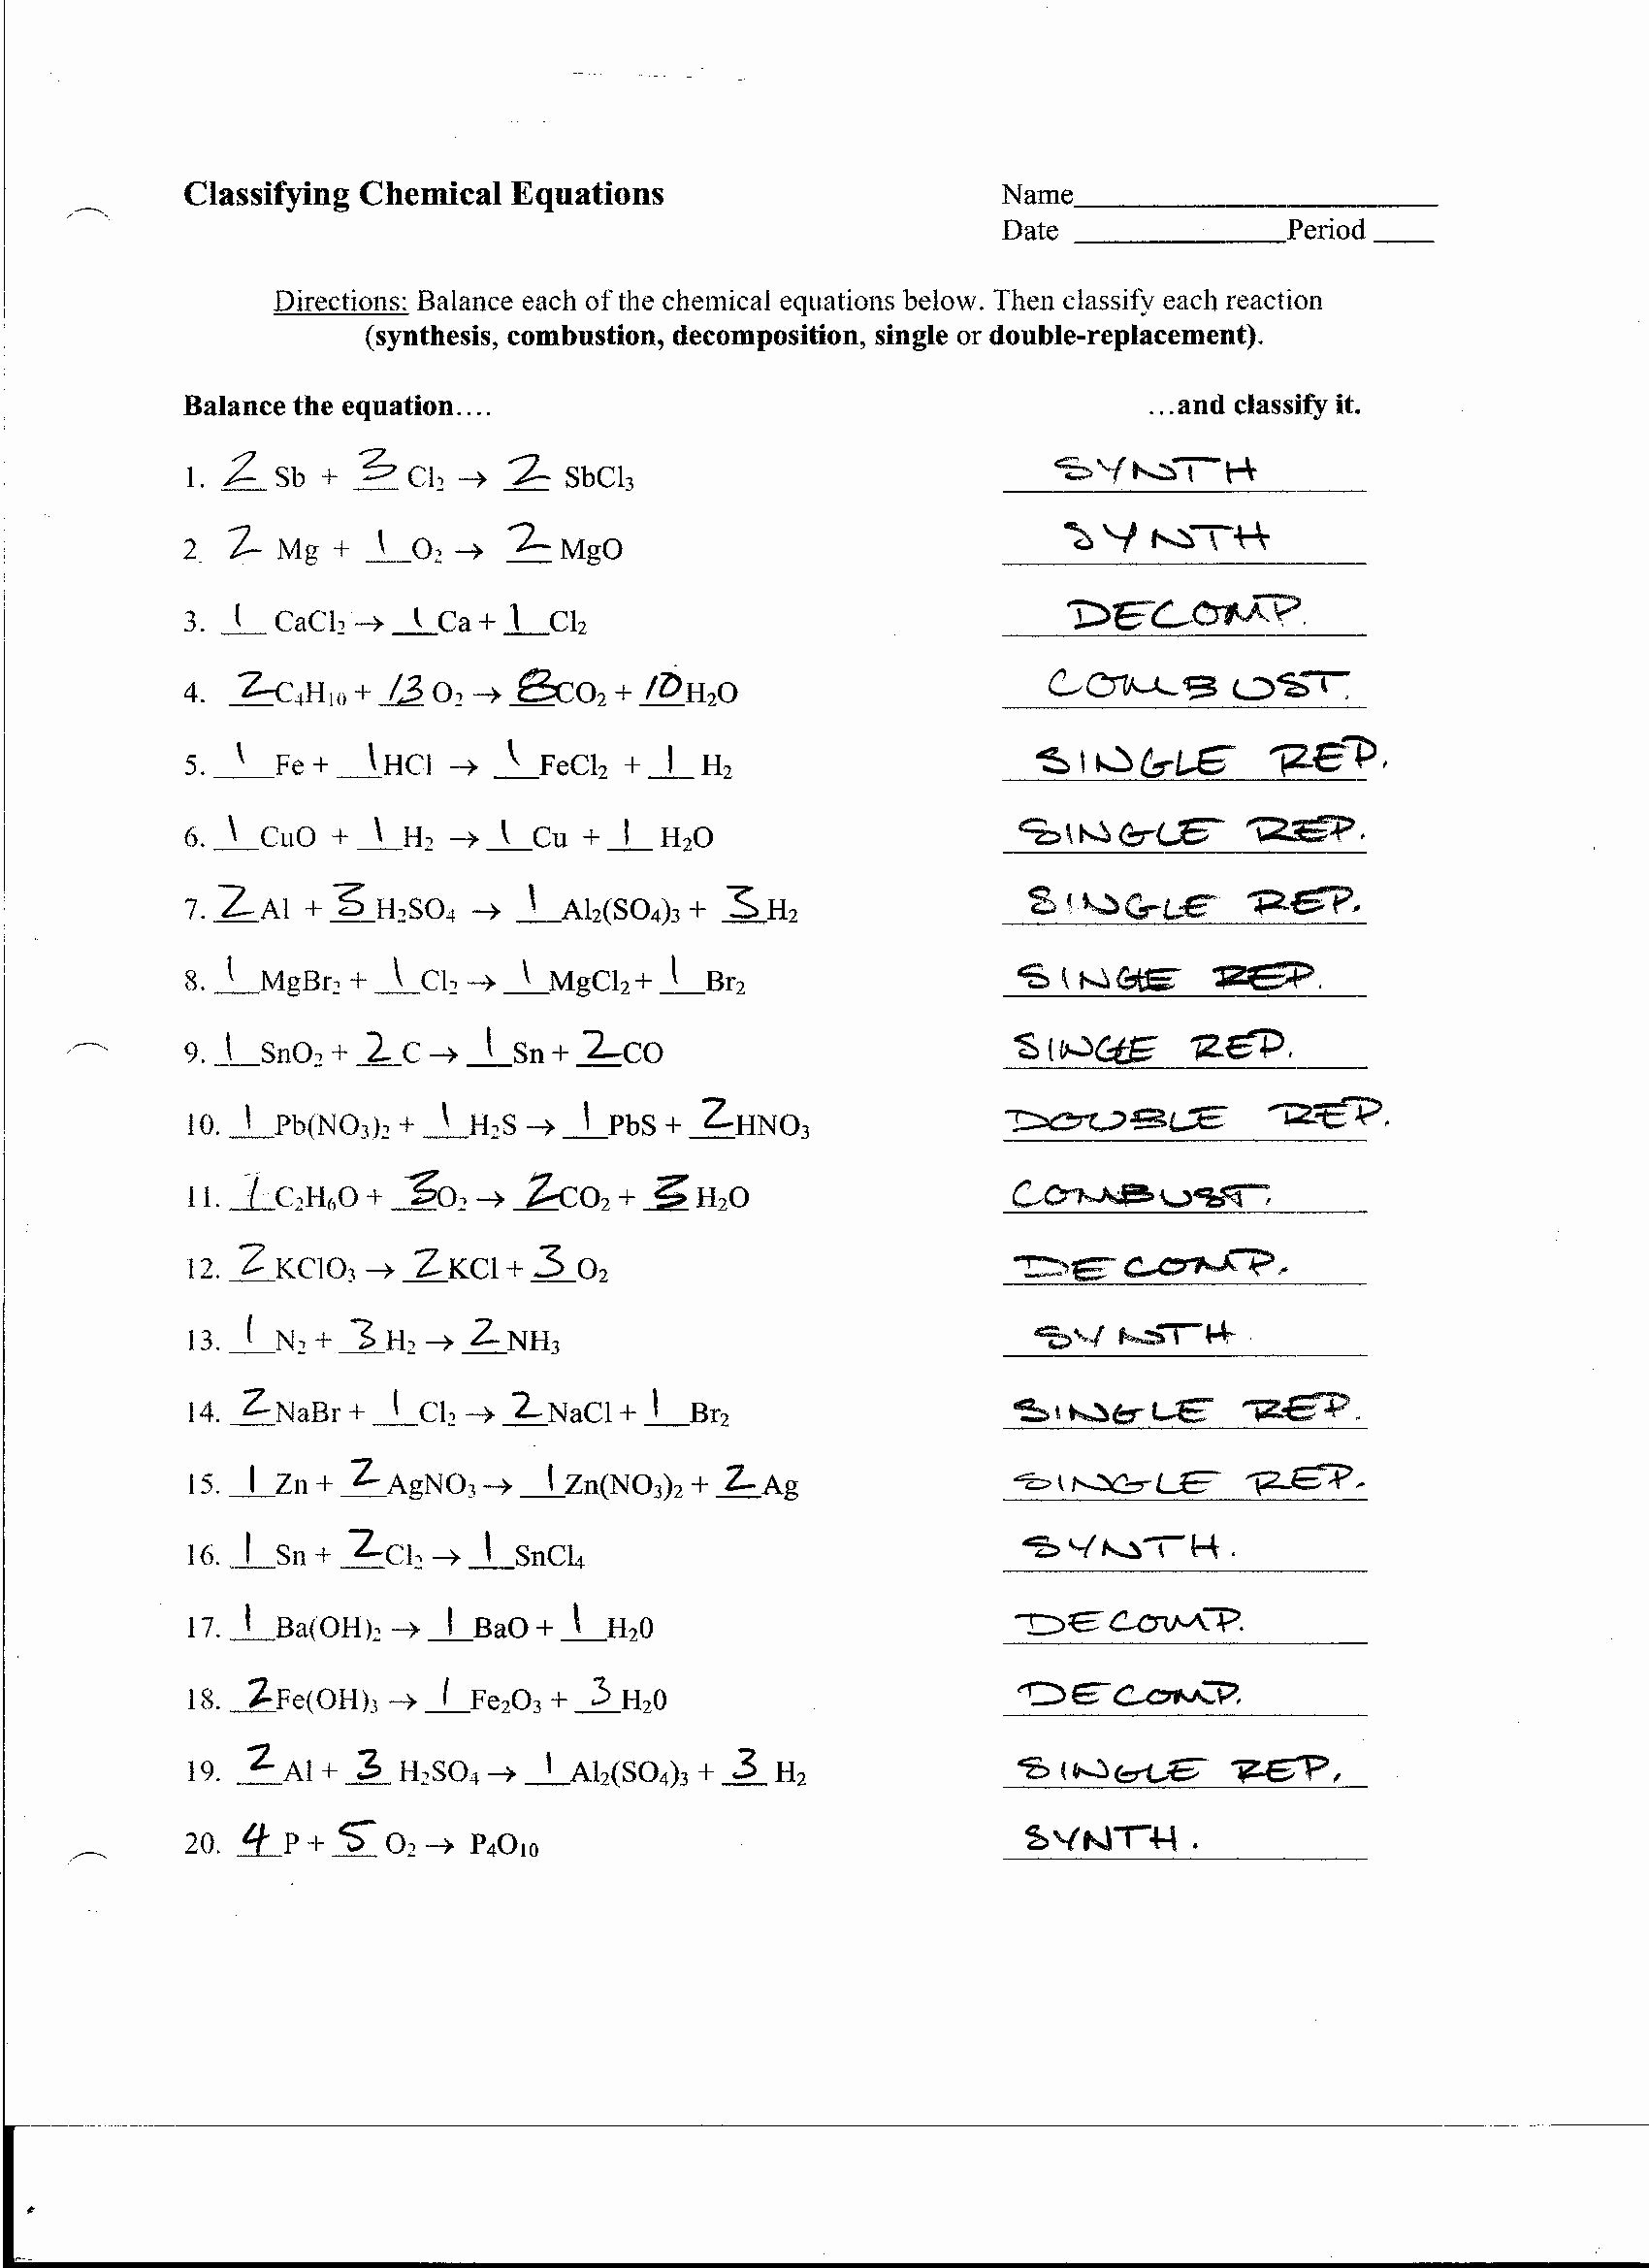 Classifying Chemical Reactions Worksheet Answers Beautiful Balance and Classify Chemical Equations Calculator